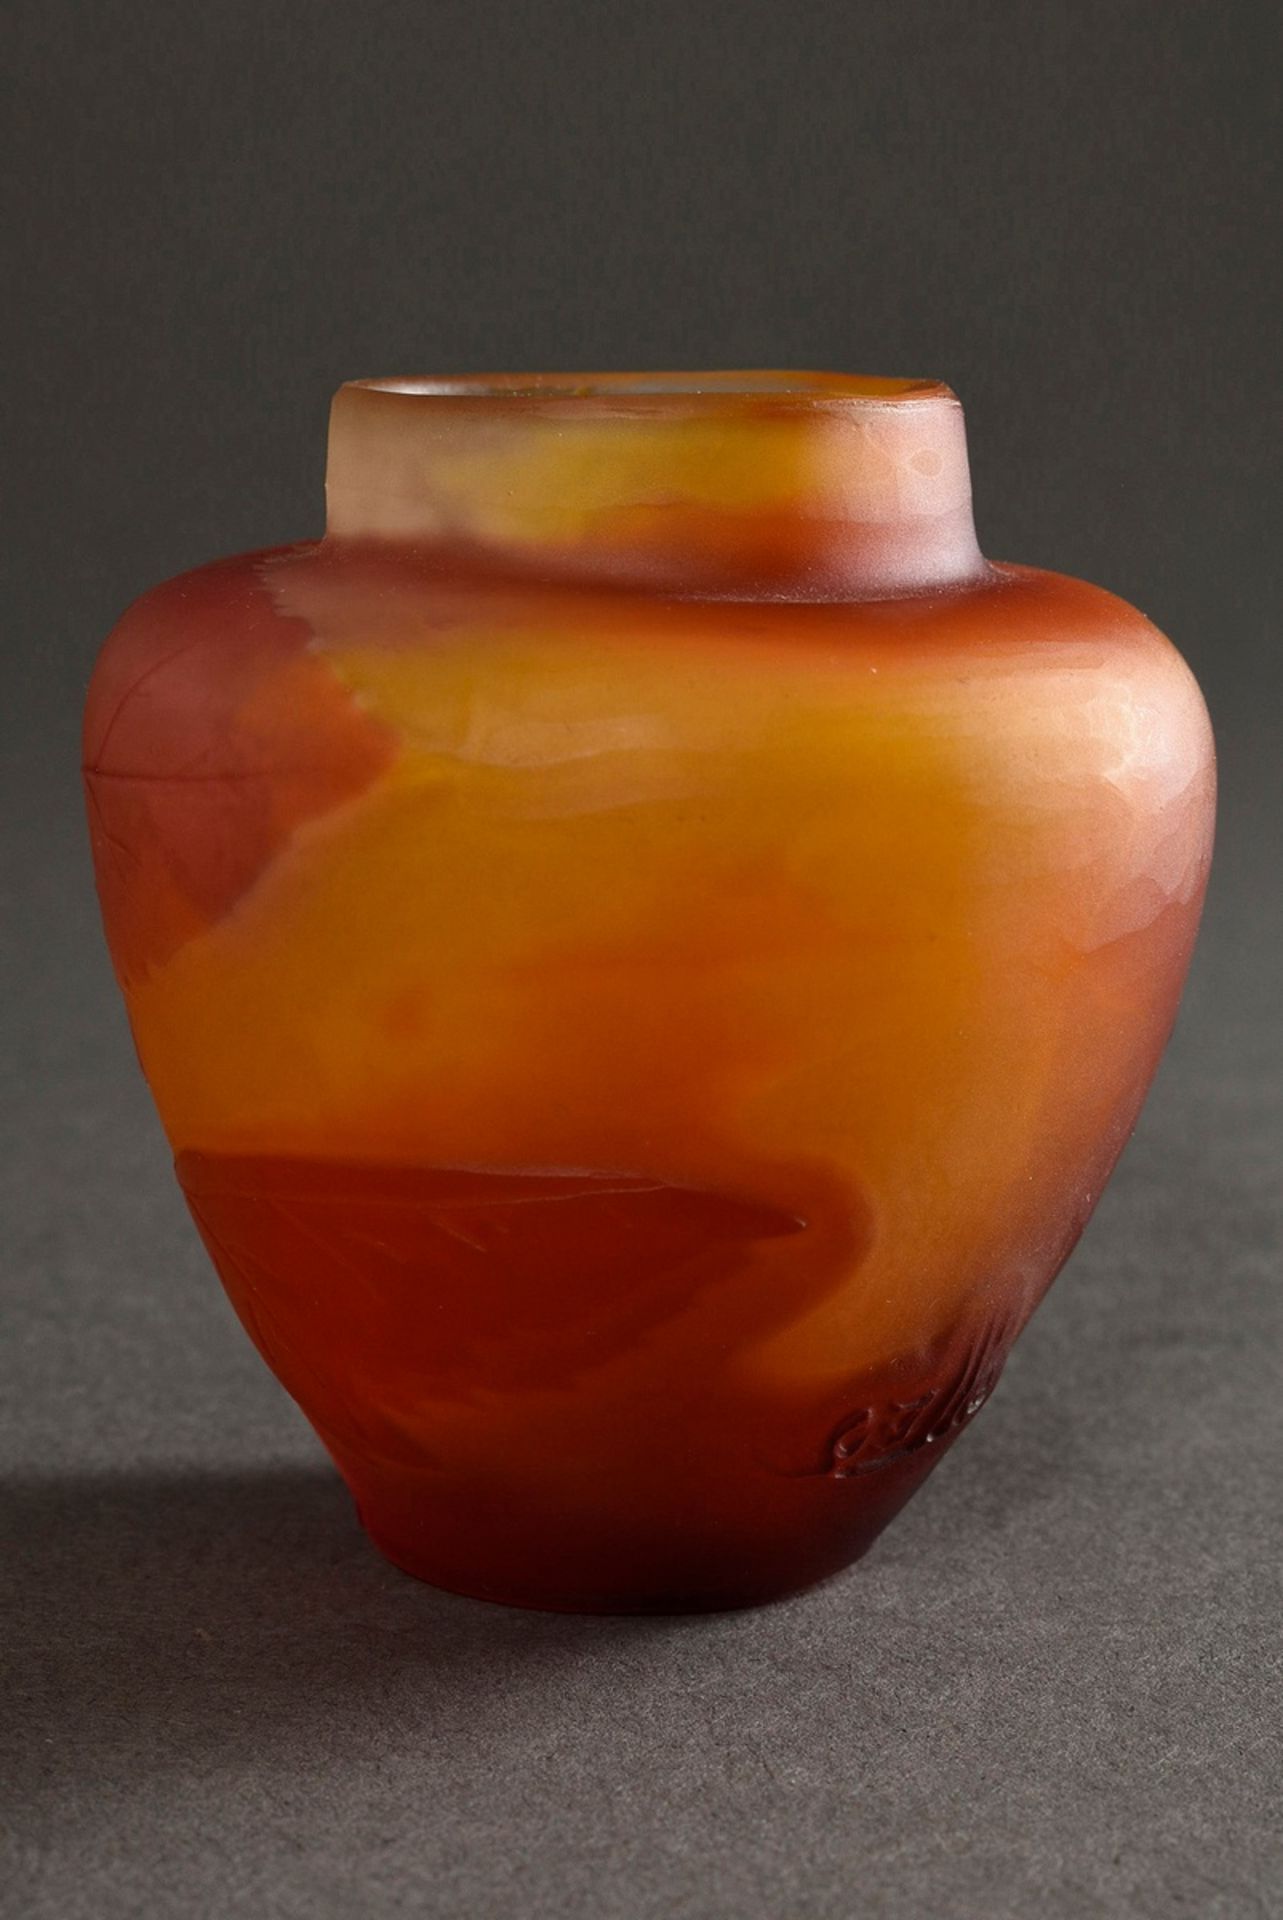 Small Gallé vase "rowan berries" in orange-red flashed glass, cut and polished, sign., 1908-1920, h - Image 2 of 6